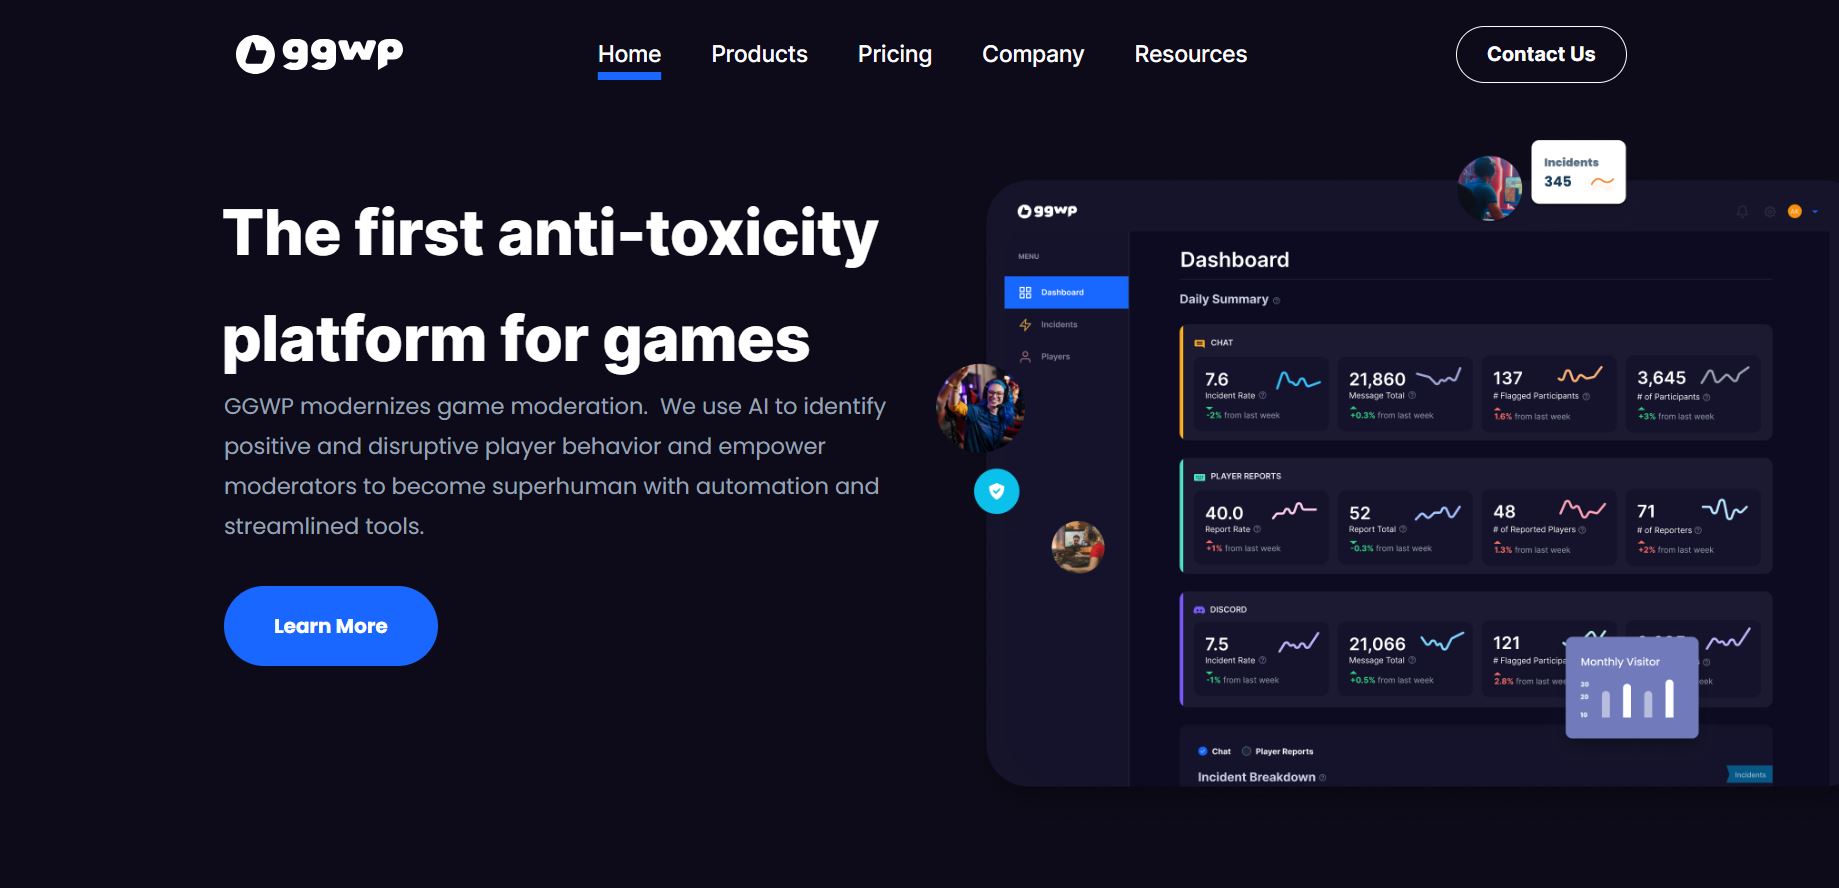 GGWP: Burlingame-based startup revolutionizing game moderation with AI, backed by $10M undisclosed funding